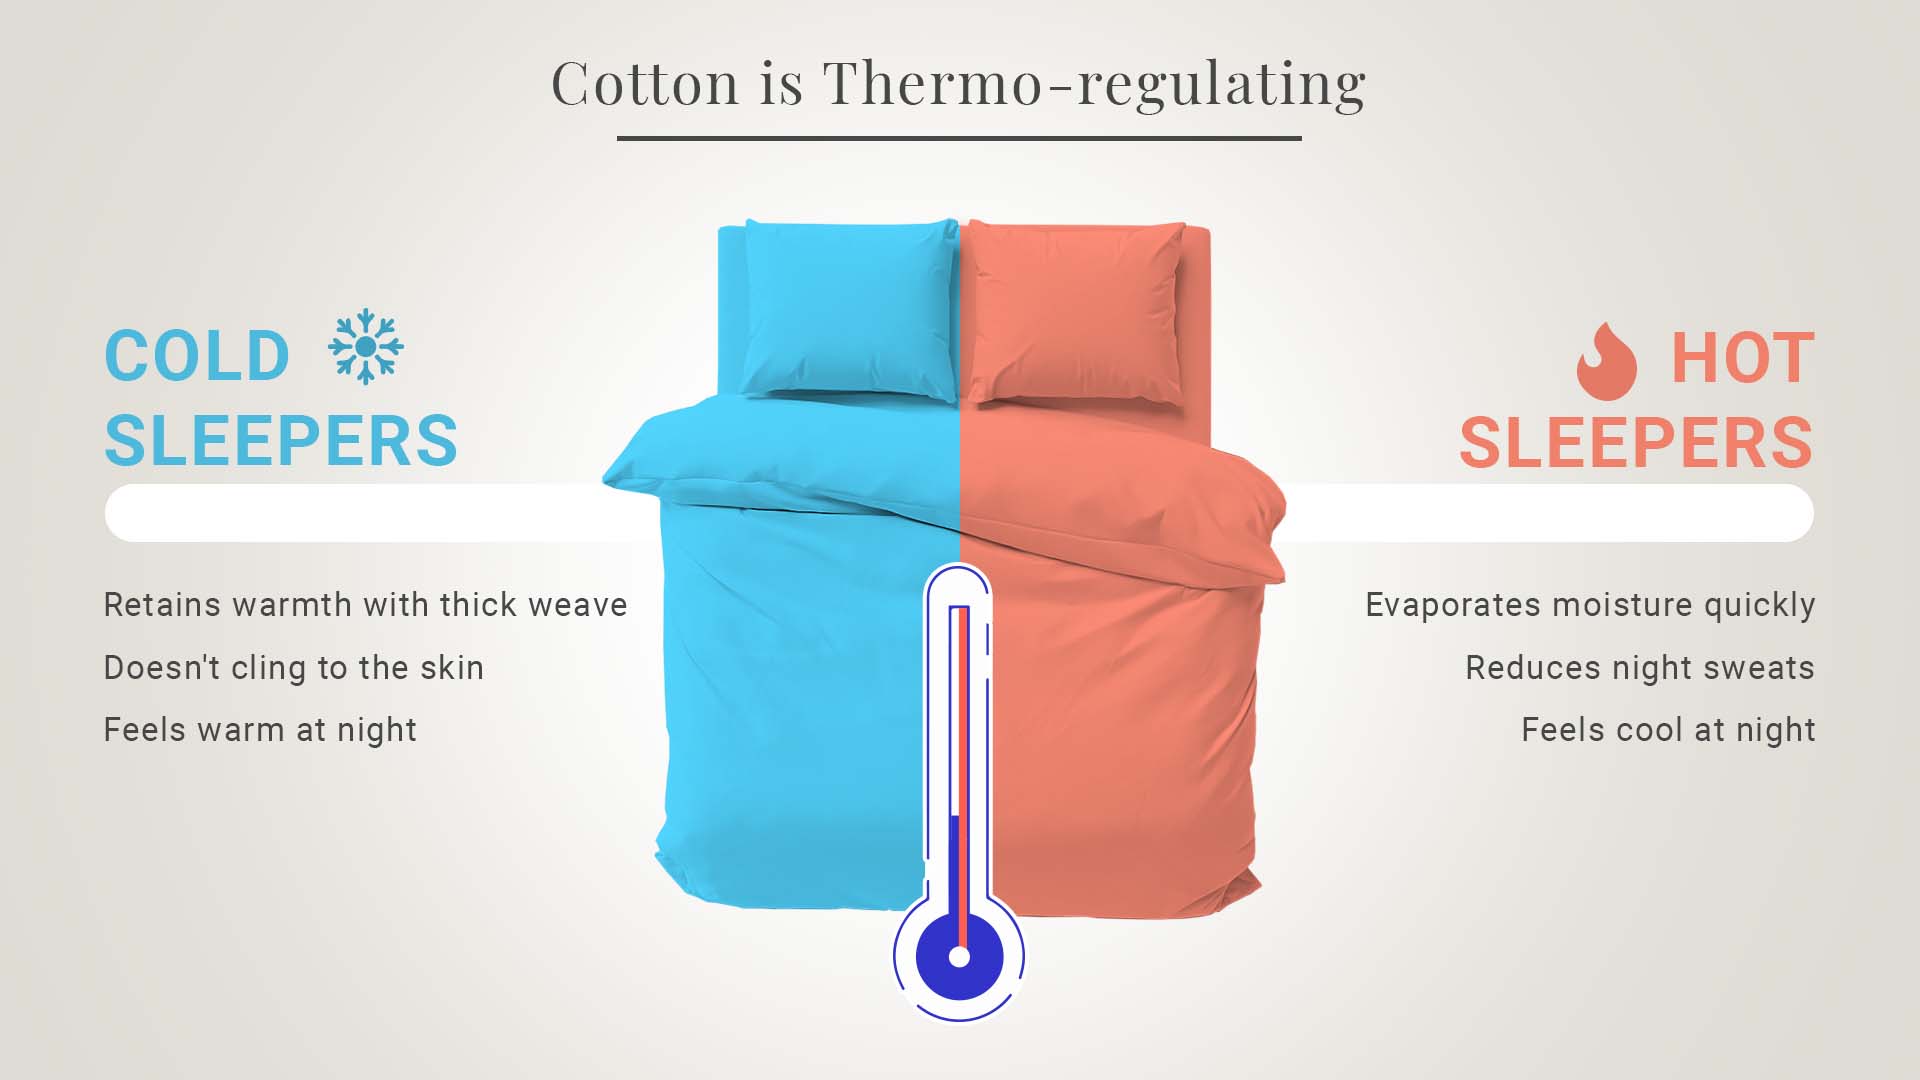 Cotton is Thermo-regulating